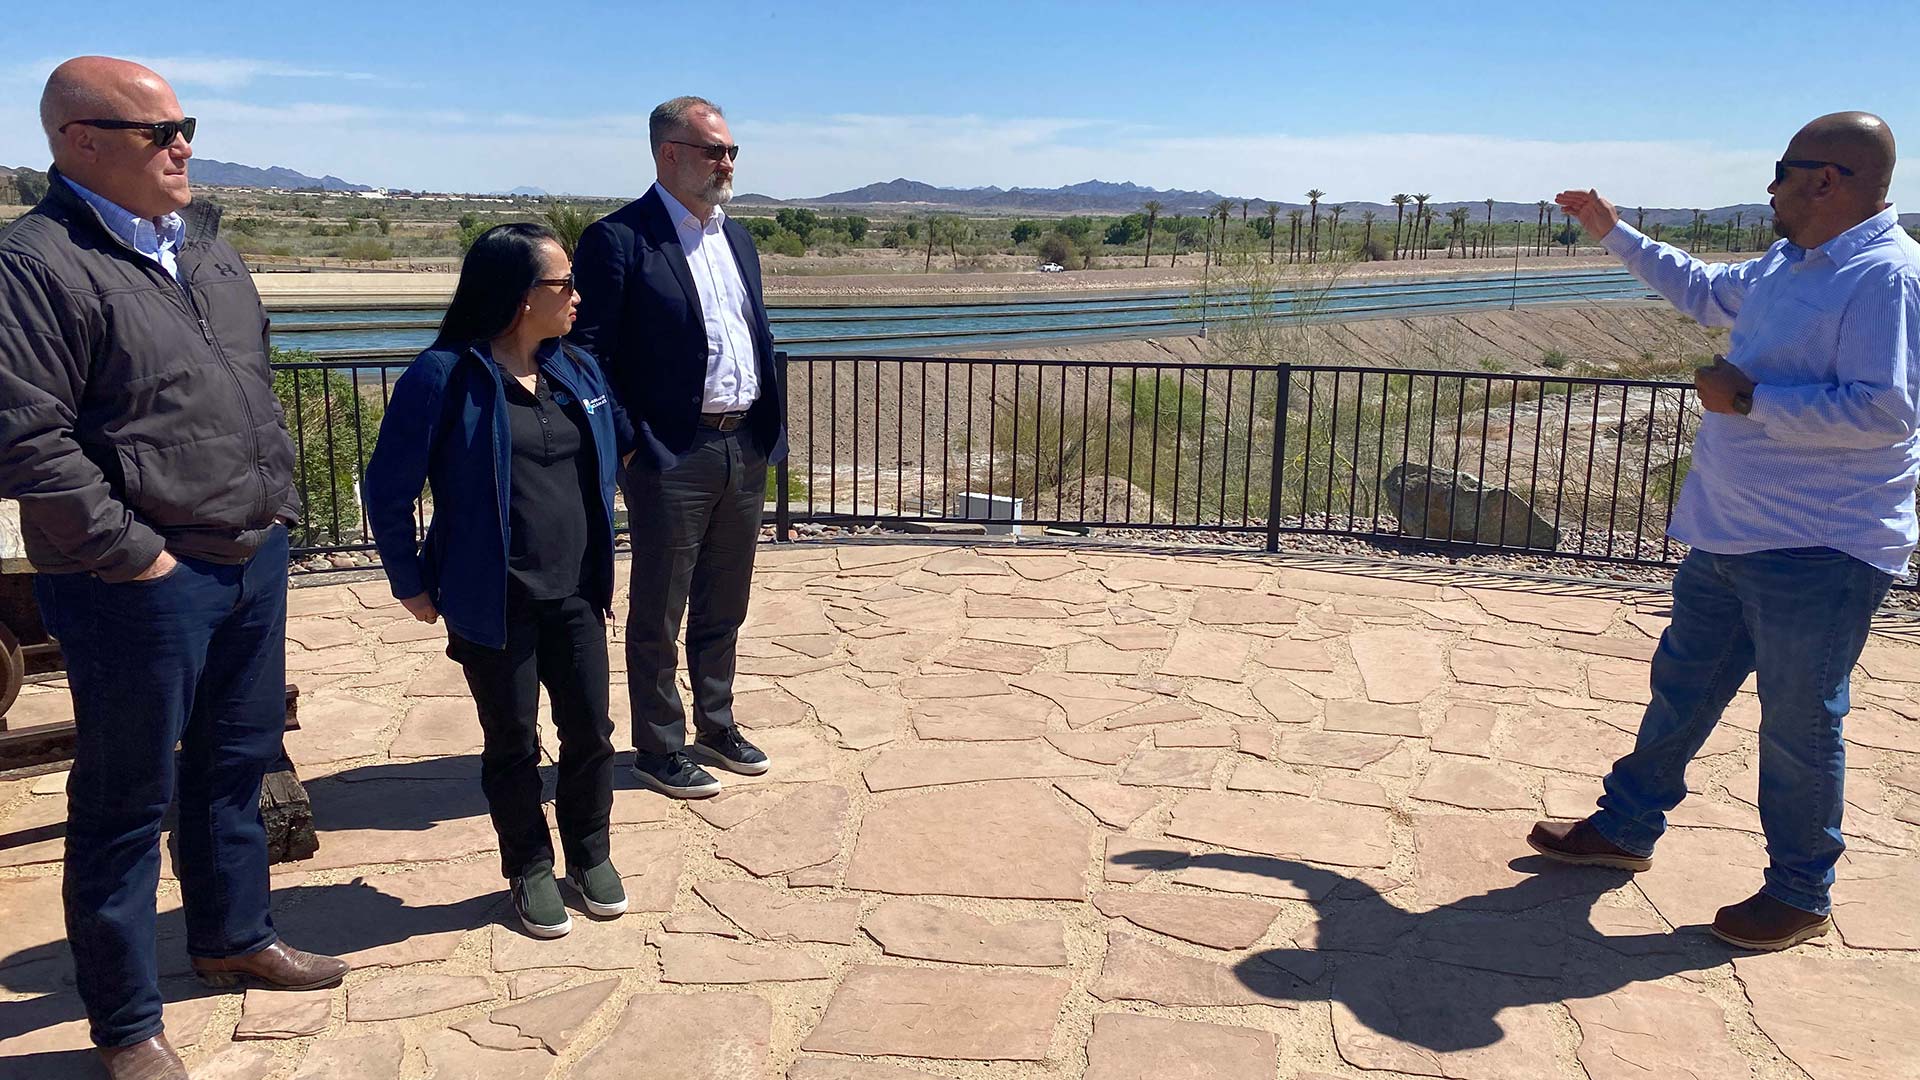 White House Infrastructure Implementation Coordinator Mitch Landrieu, Bureau of Reclamation Commissioner Camille Calimlim Touton and Senior Advisor to the President and Deputy Secretary of the Interior Tommy Beaudreau, during a visit to the Imperial Dam on Tuesday, April 5. 